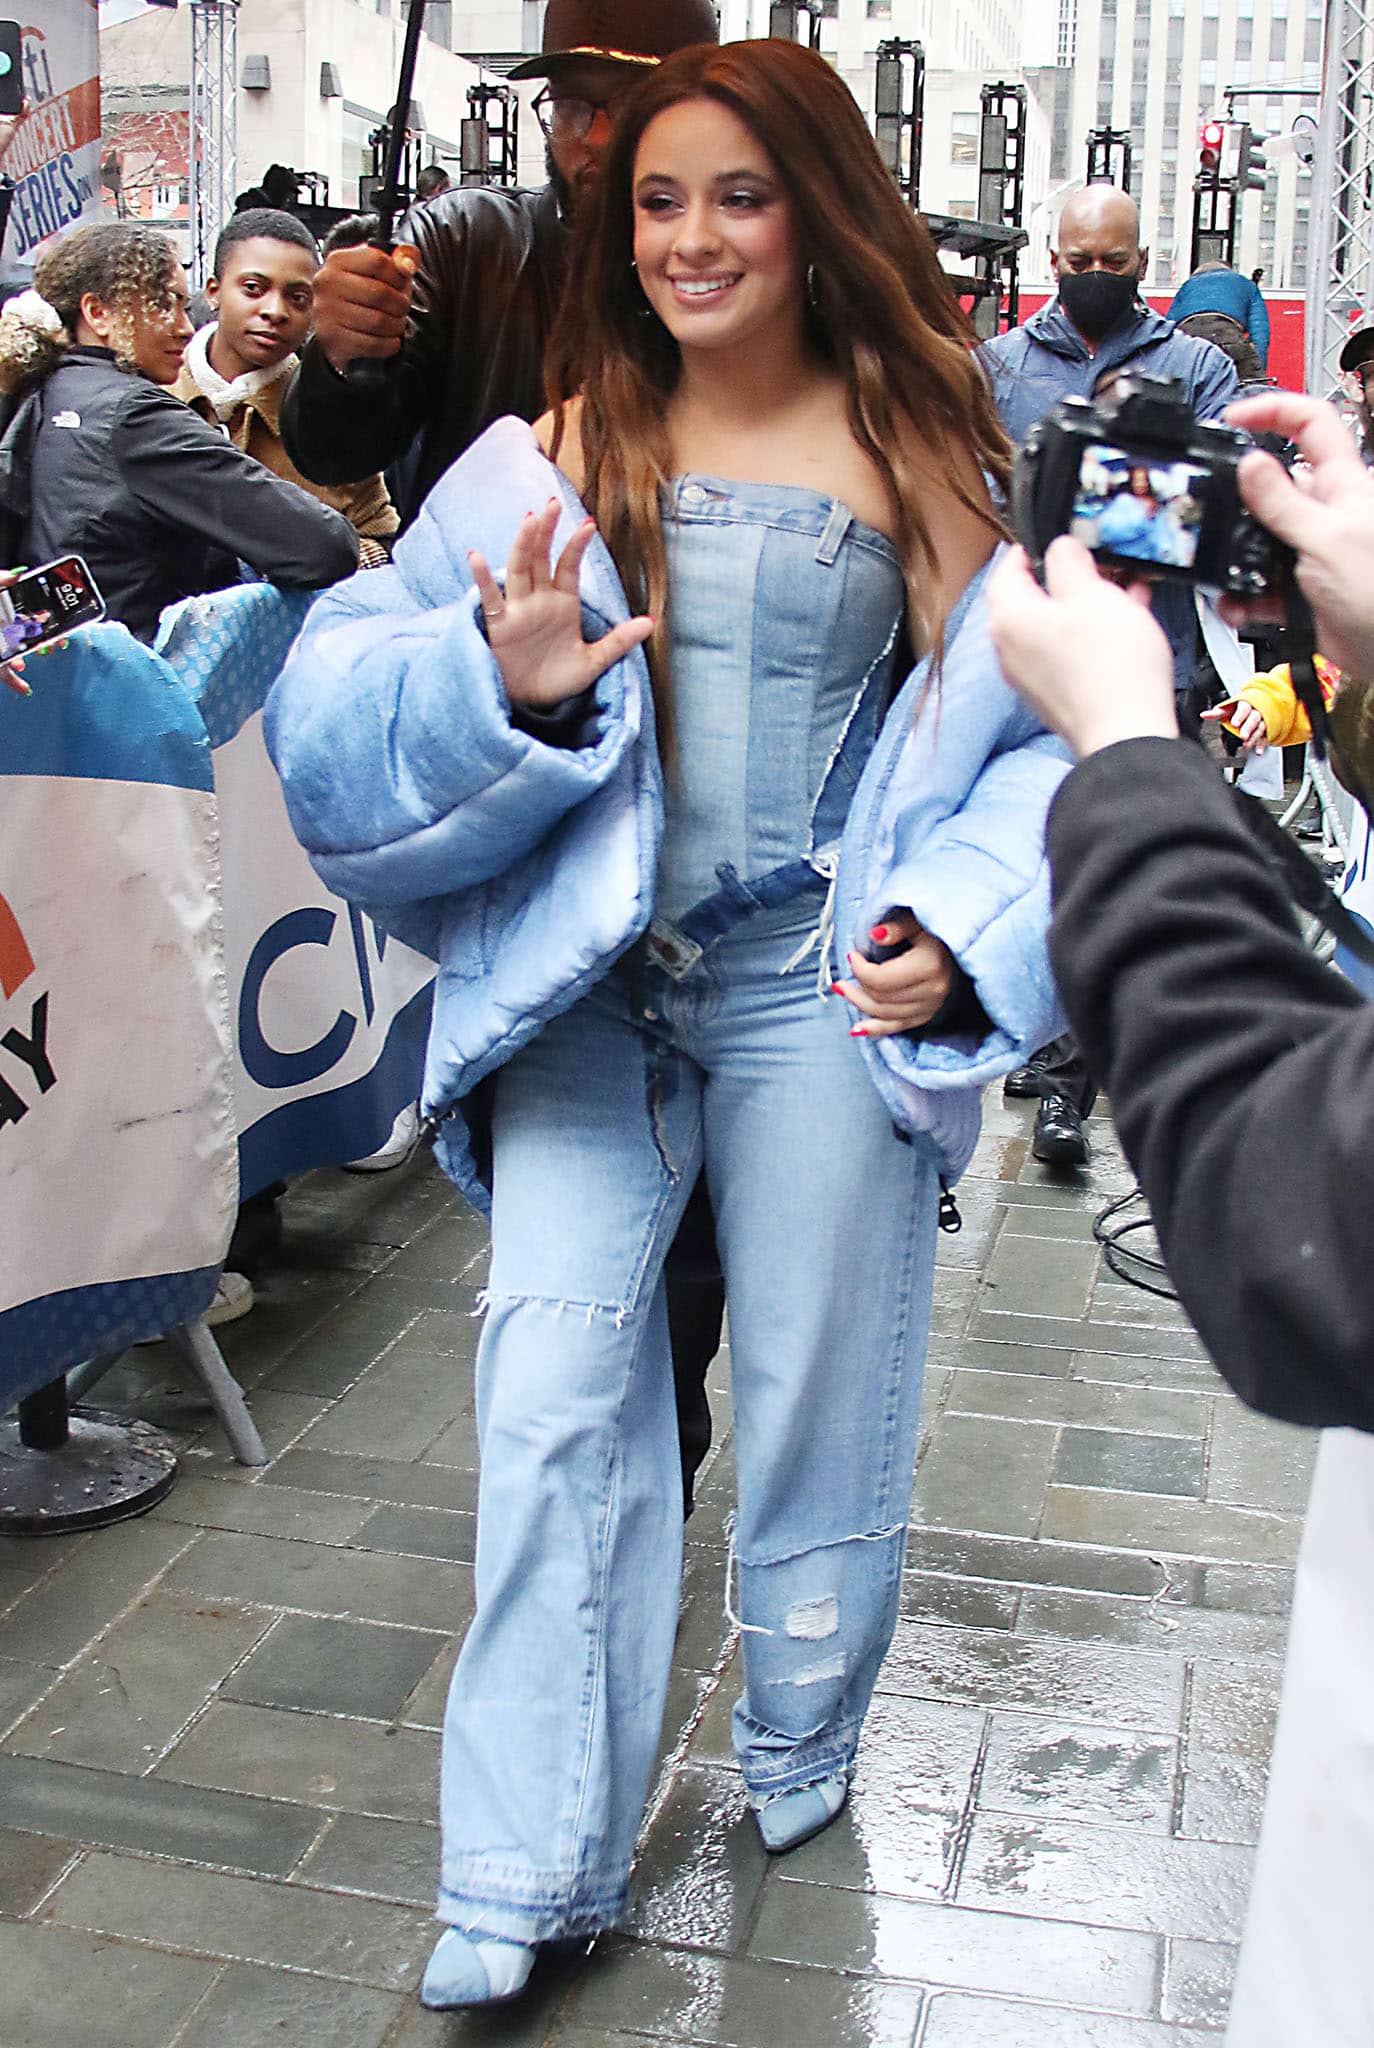 Camila Cabello wears a strapless denim corset top by Denimcratic with a denim puffer jacket, matching distressed wide-leg jeans, and denim heels